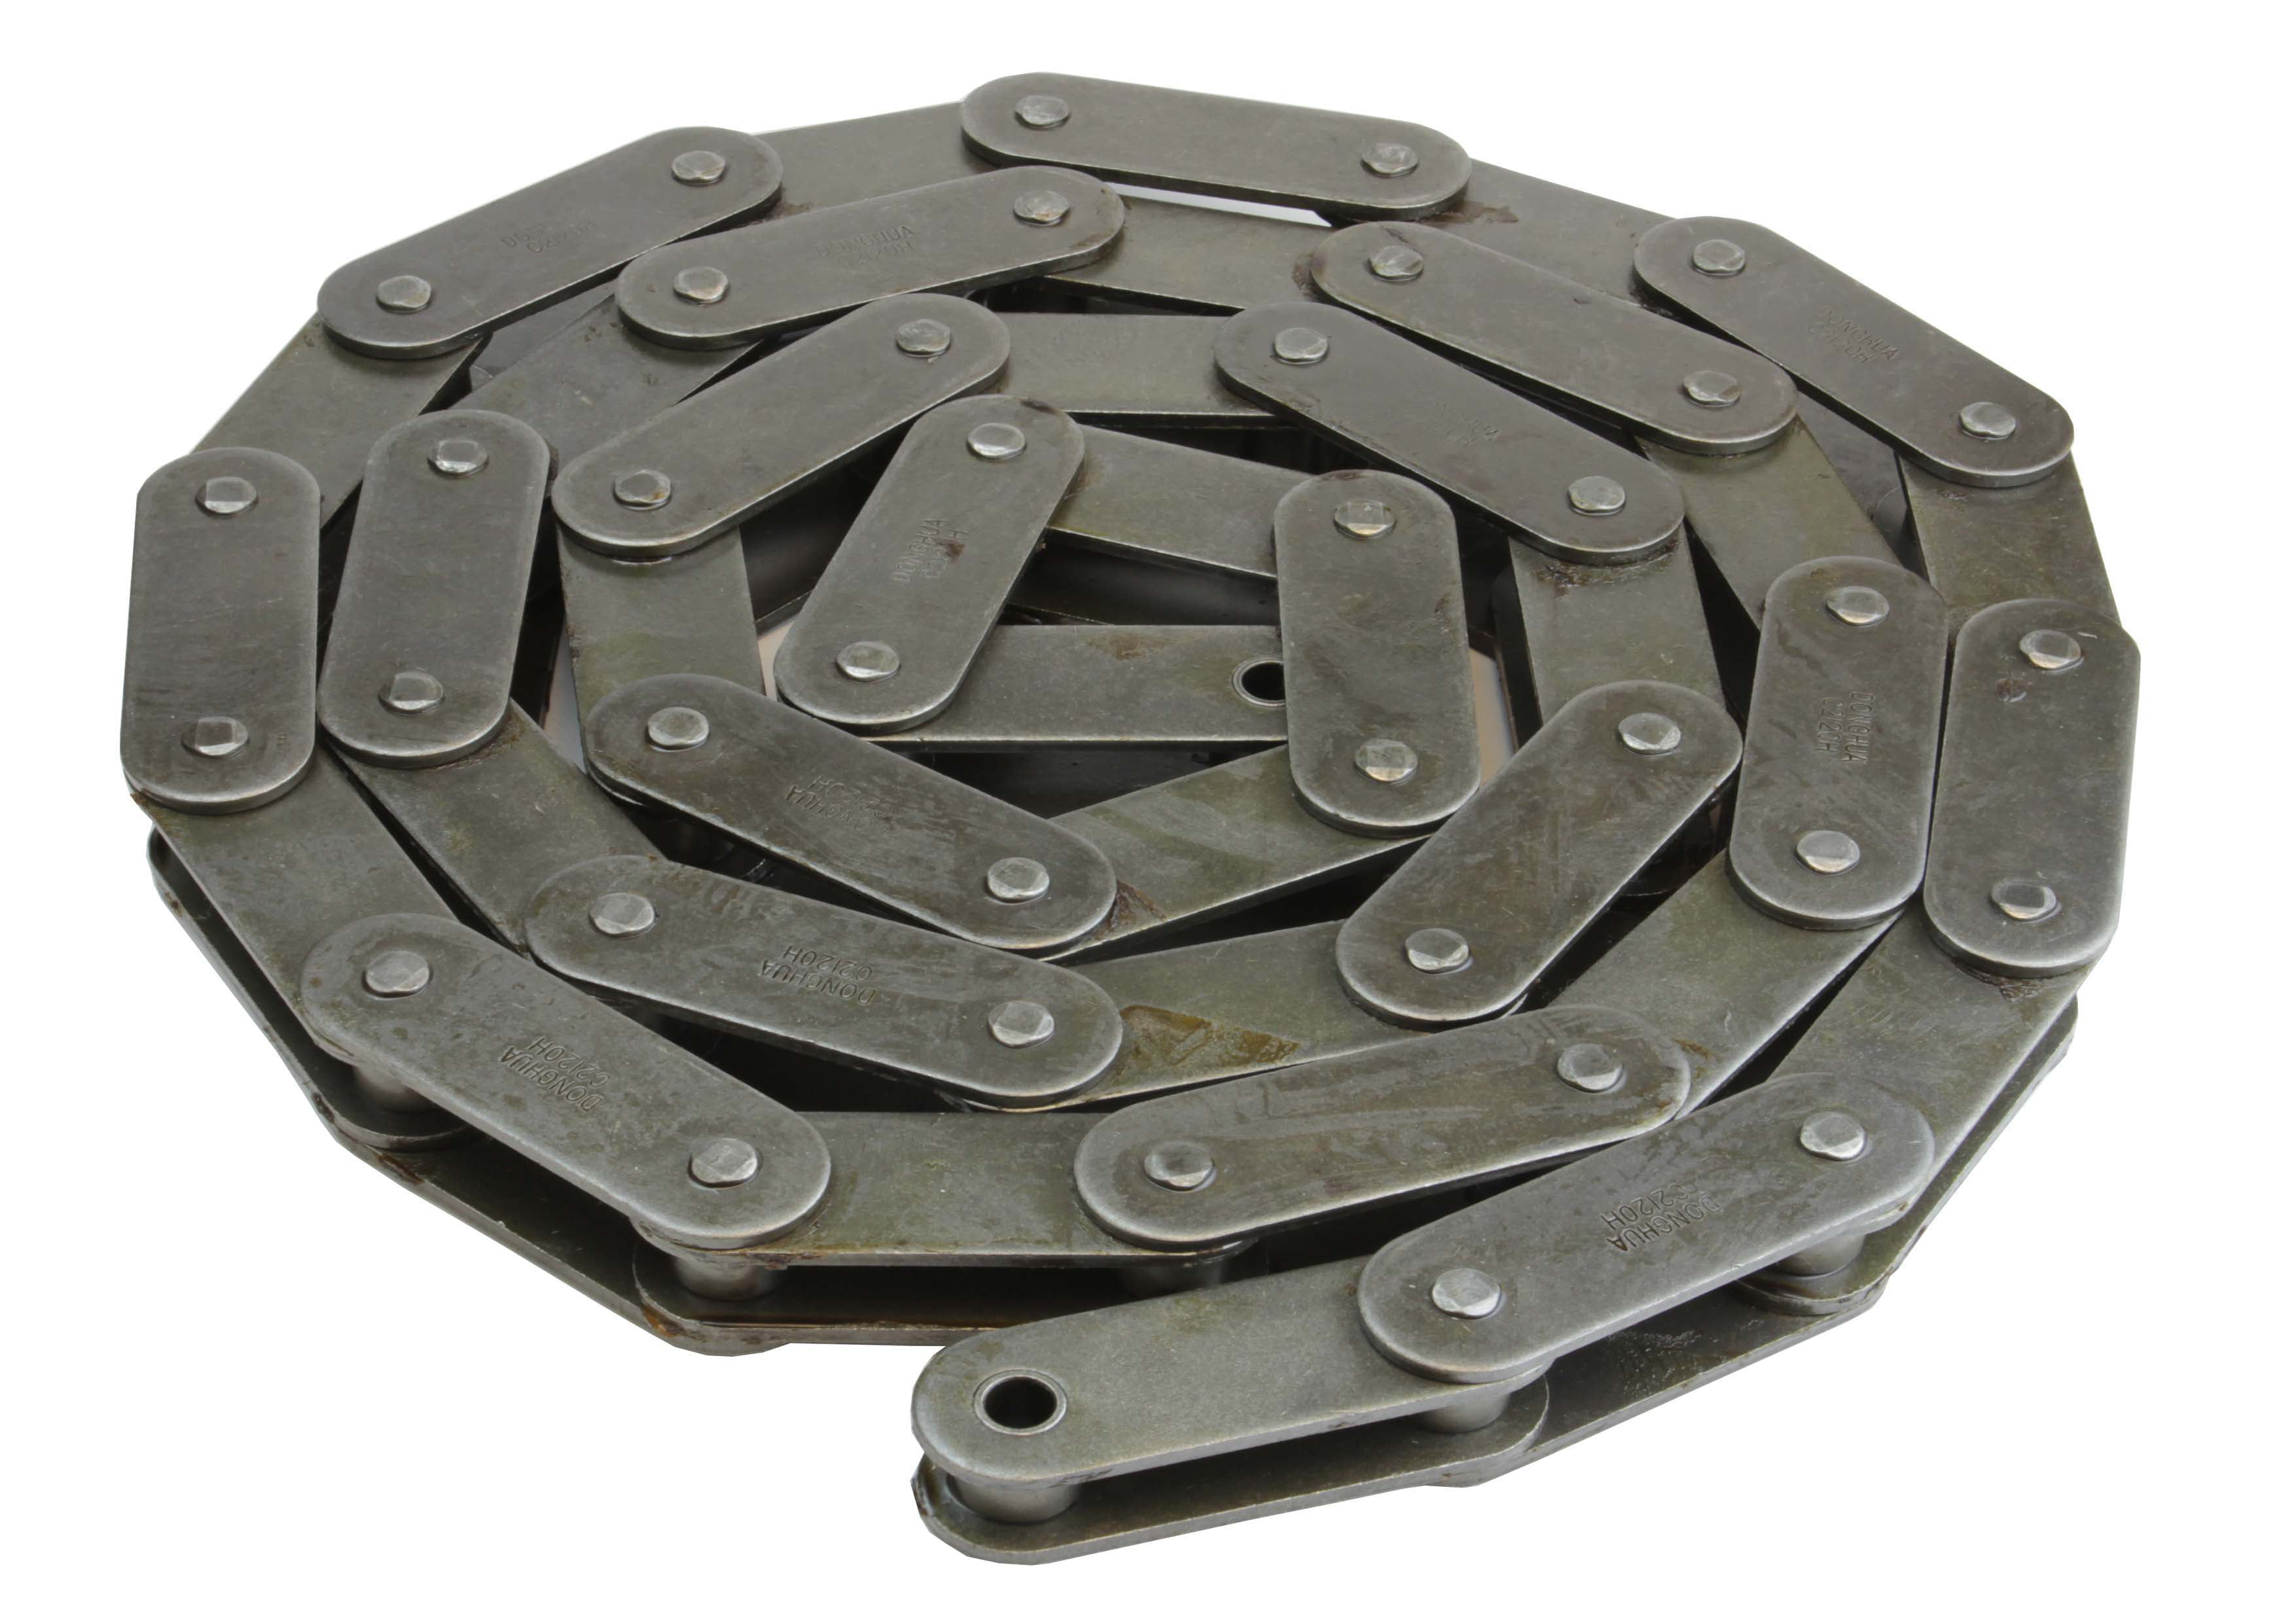 Extended Pitch,1 Connecting Link Jeremywell C2120H Conveyor Roller Chain Heavy Duty 10FT 